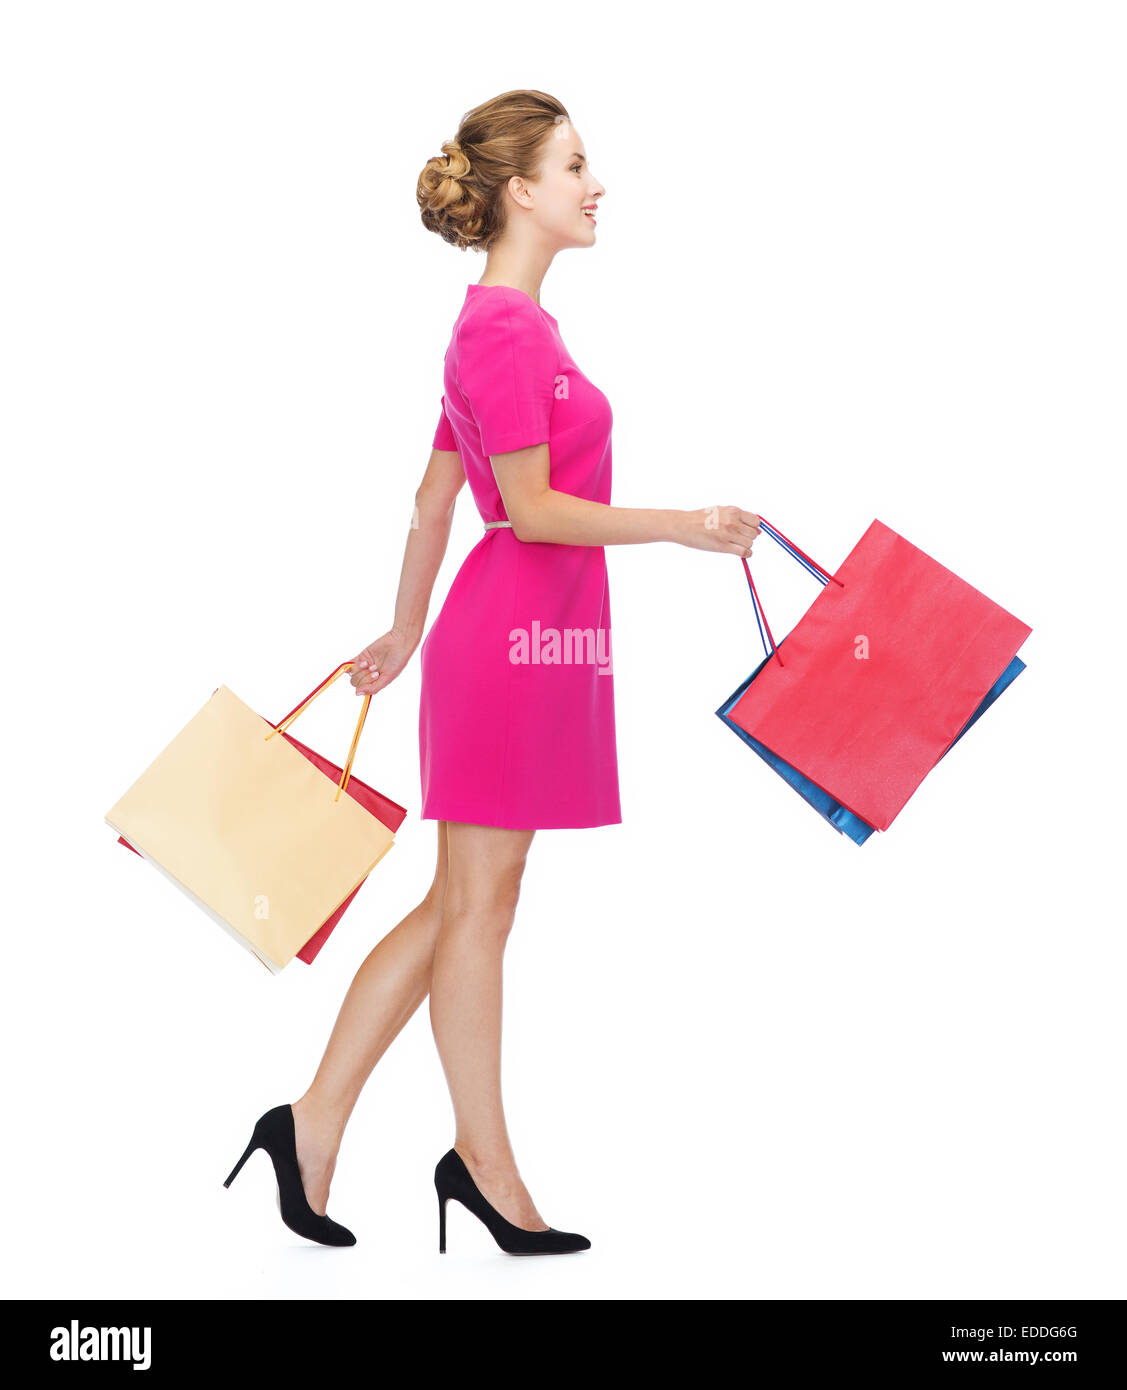 smiling woman in pink dress with shopping bags Stock Photo